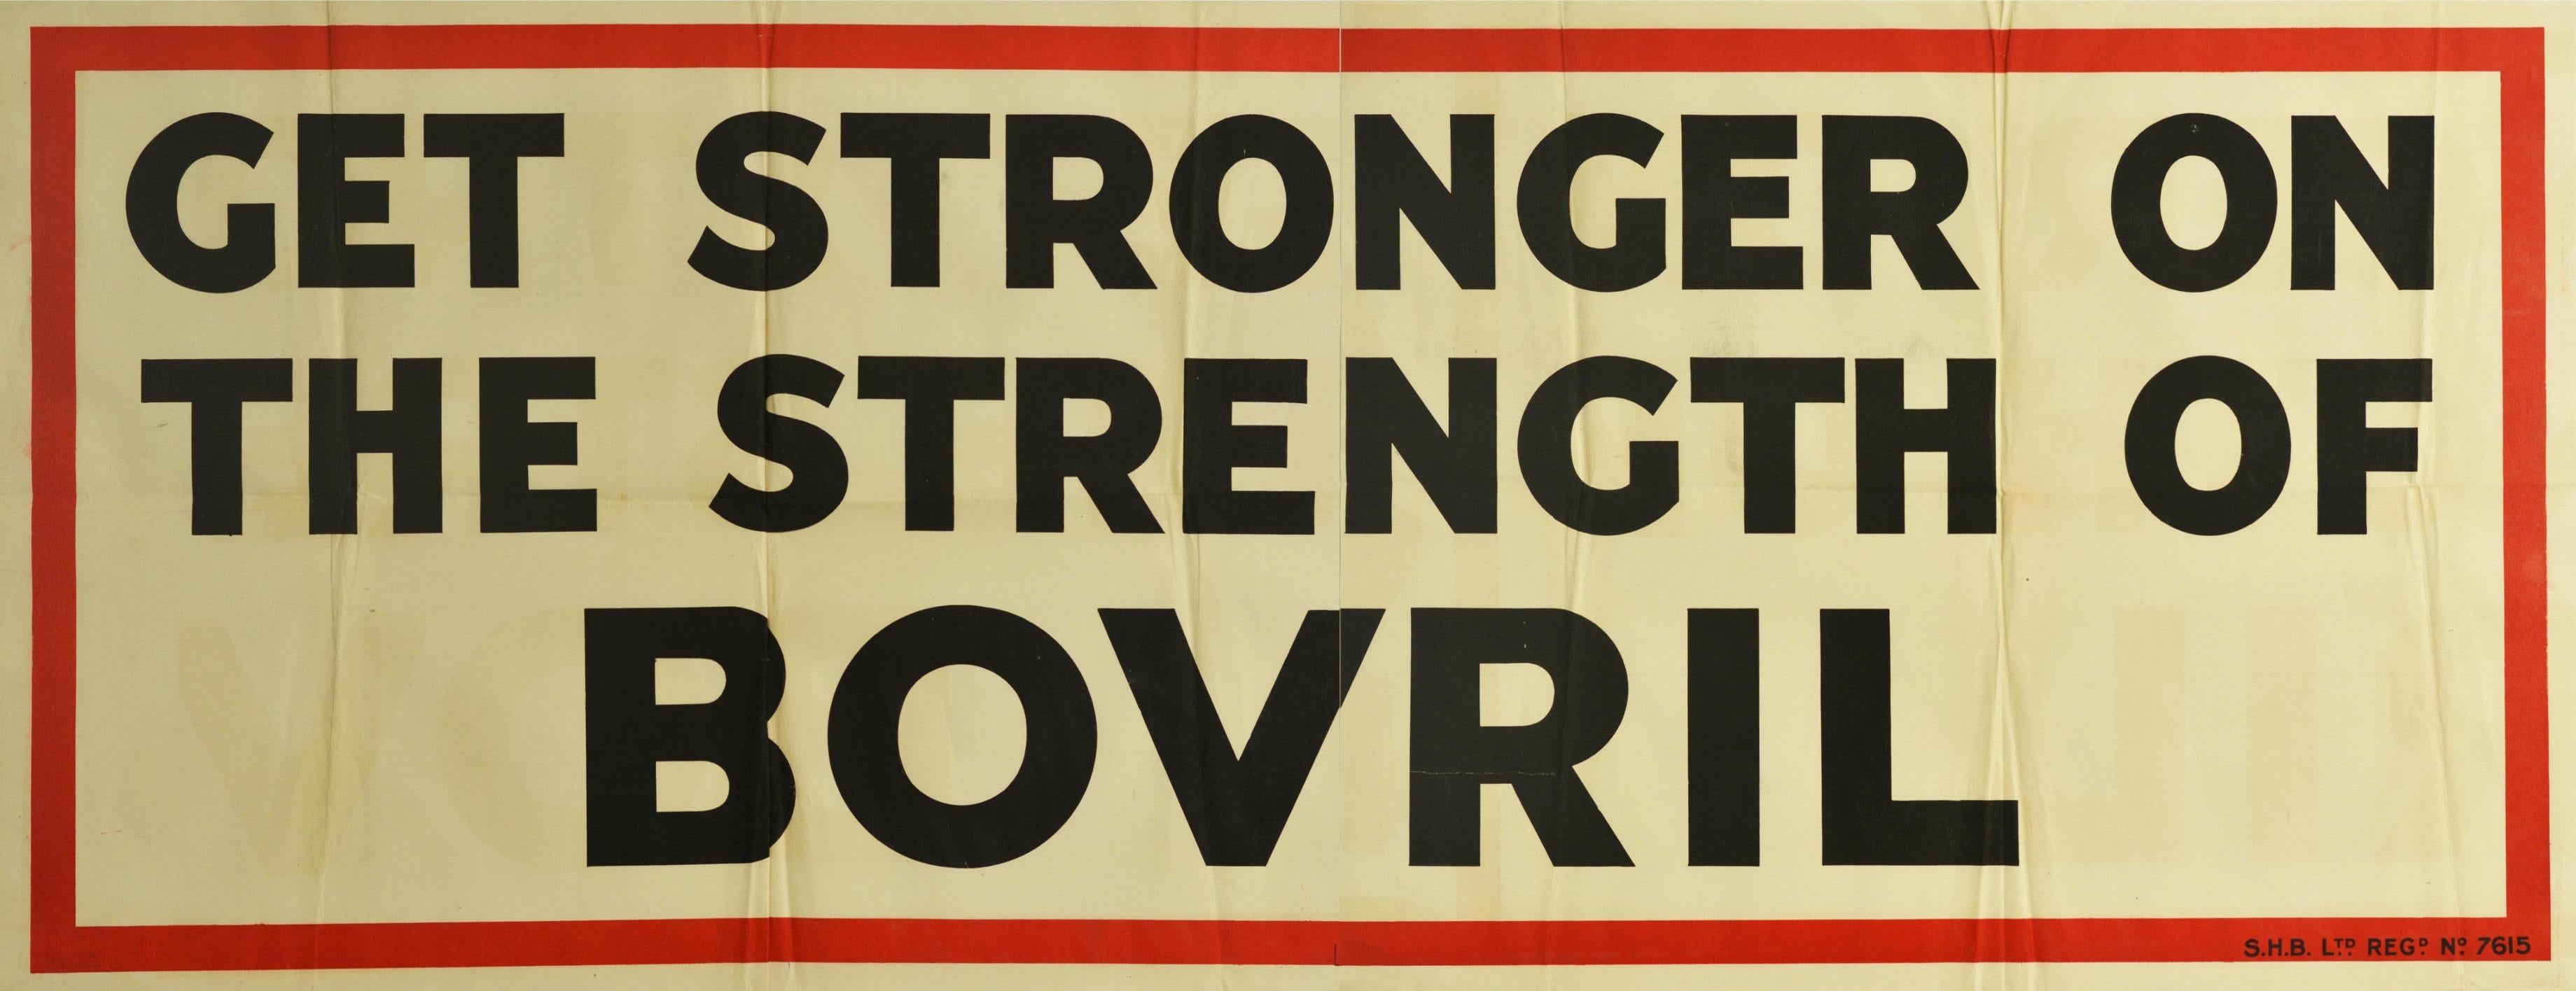 Original vintage food advertising poster for Bovril - Get stronger on the strength of Bovril - featuring bold black lettering on a white background in a red frame border. Printed in Britain in the 1930s, this campaign used puns and word play to